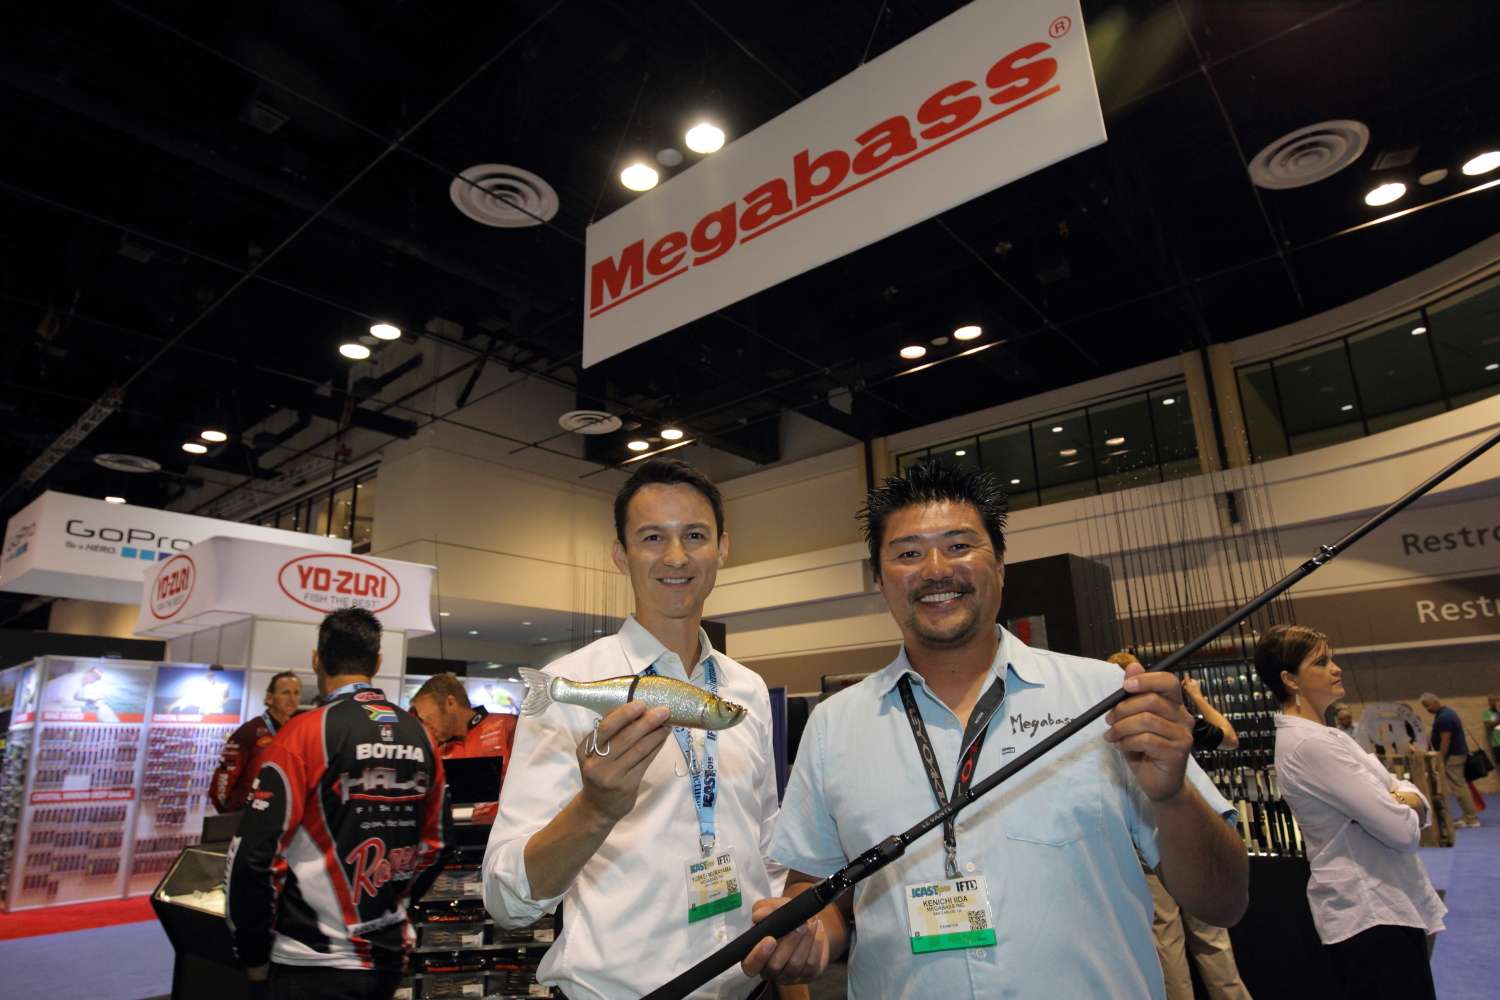 Megabass of America's vice president Yuskei Murayama and sales and product development manager has mega good stuff.
